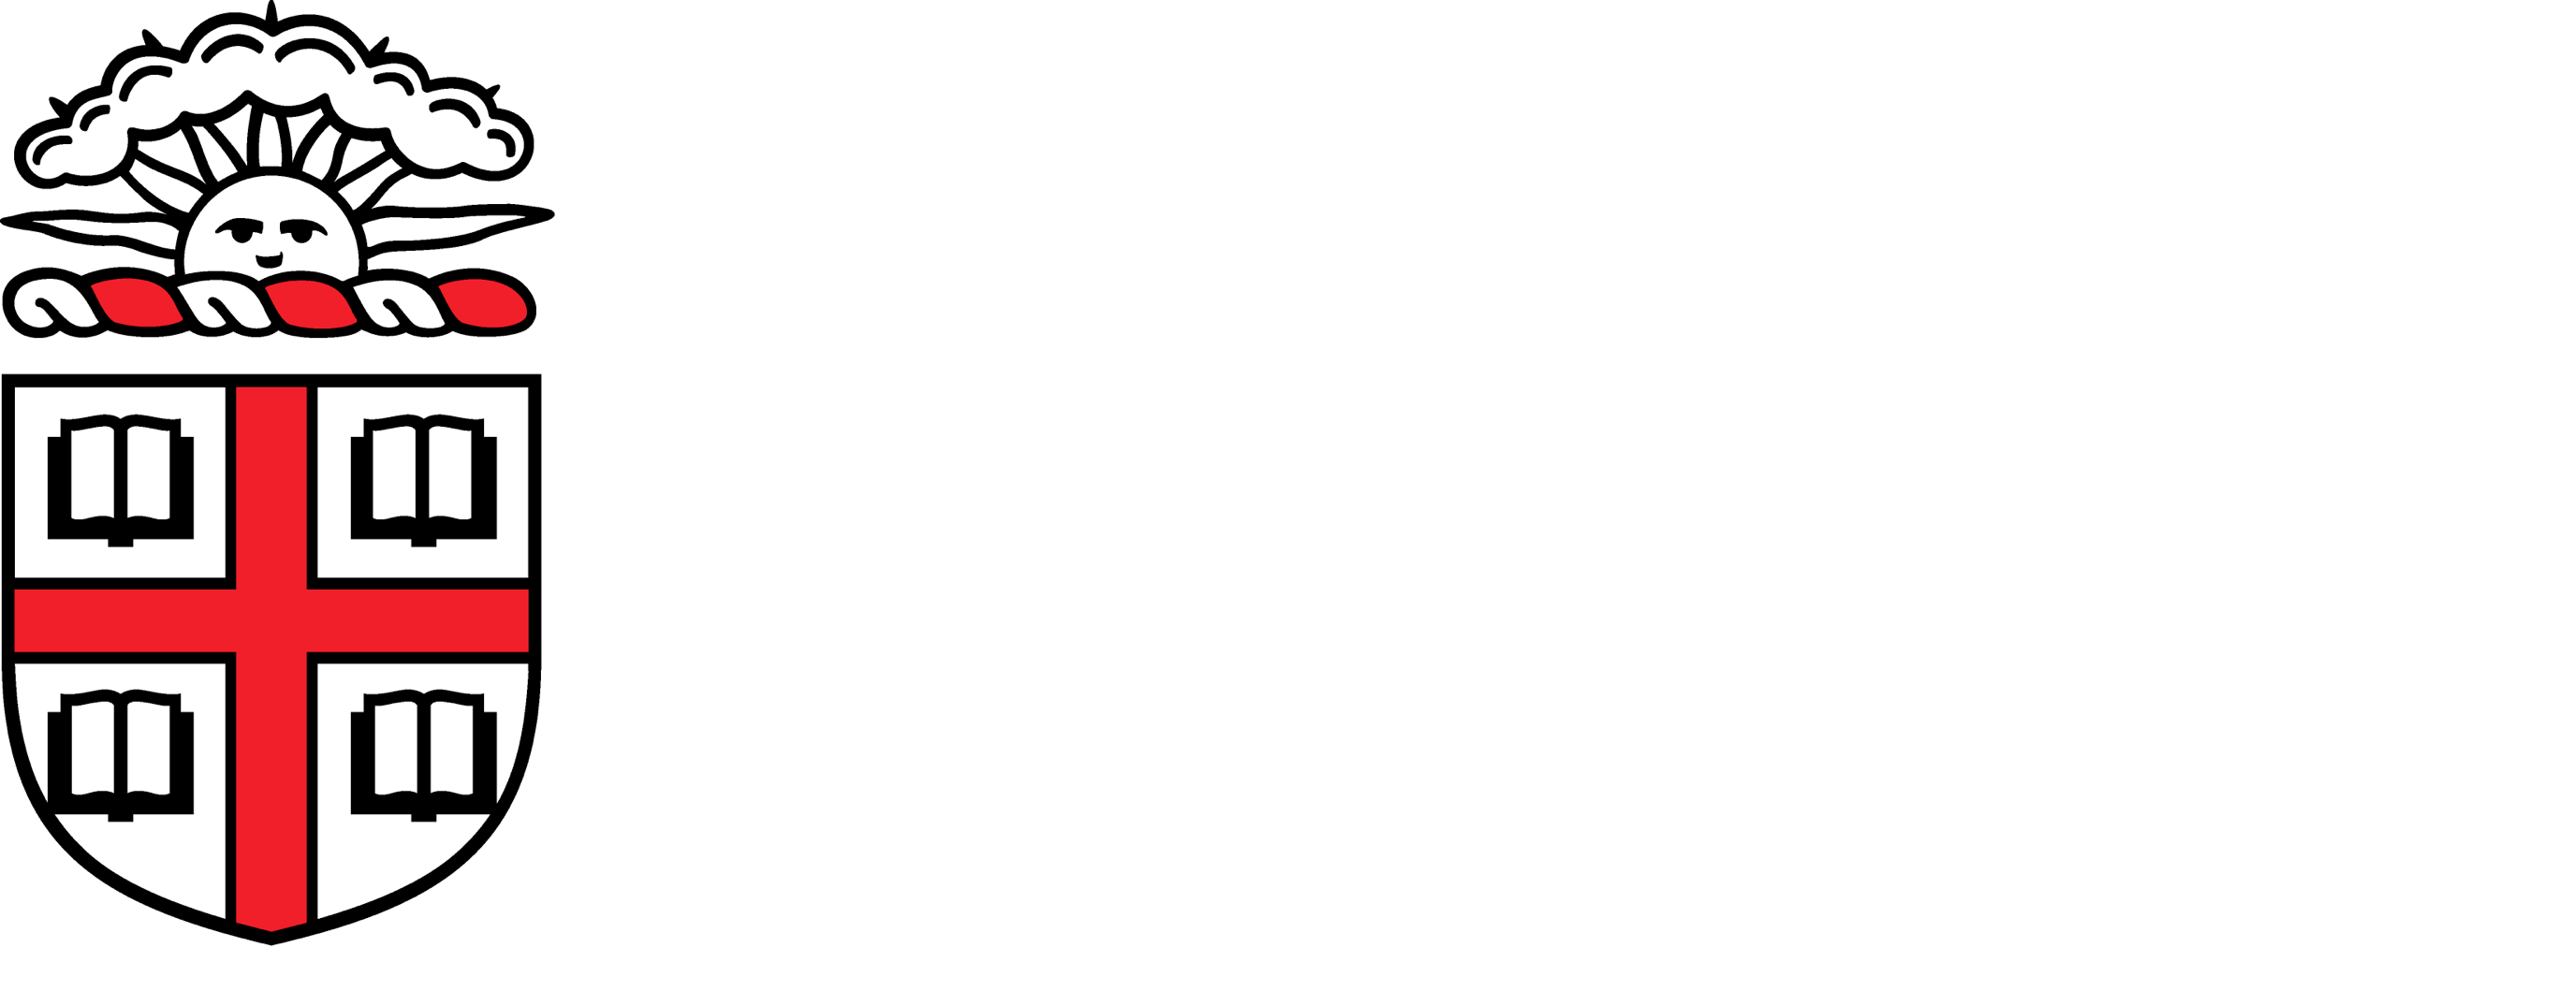 Brown Institute at Brown for Environment and Society logo